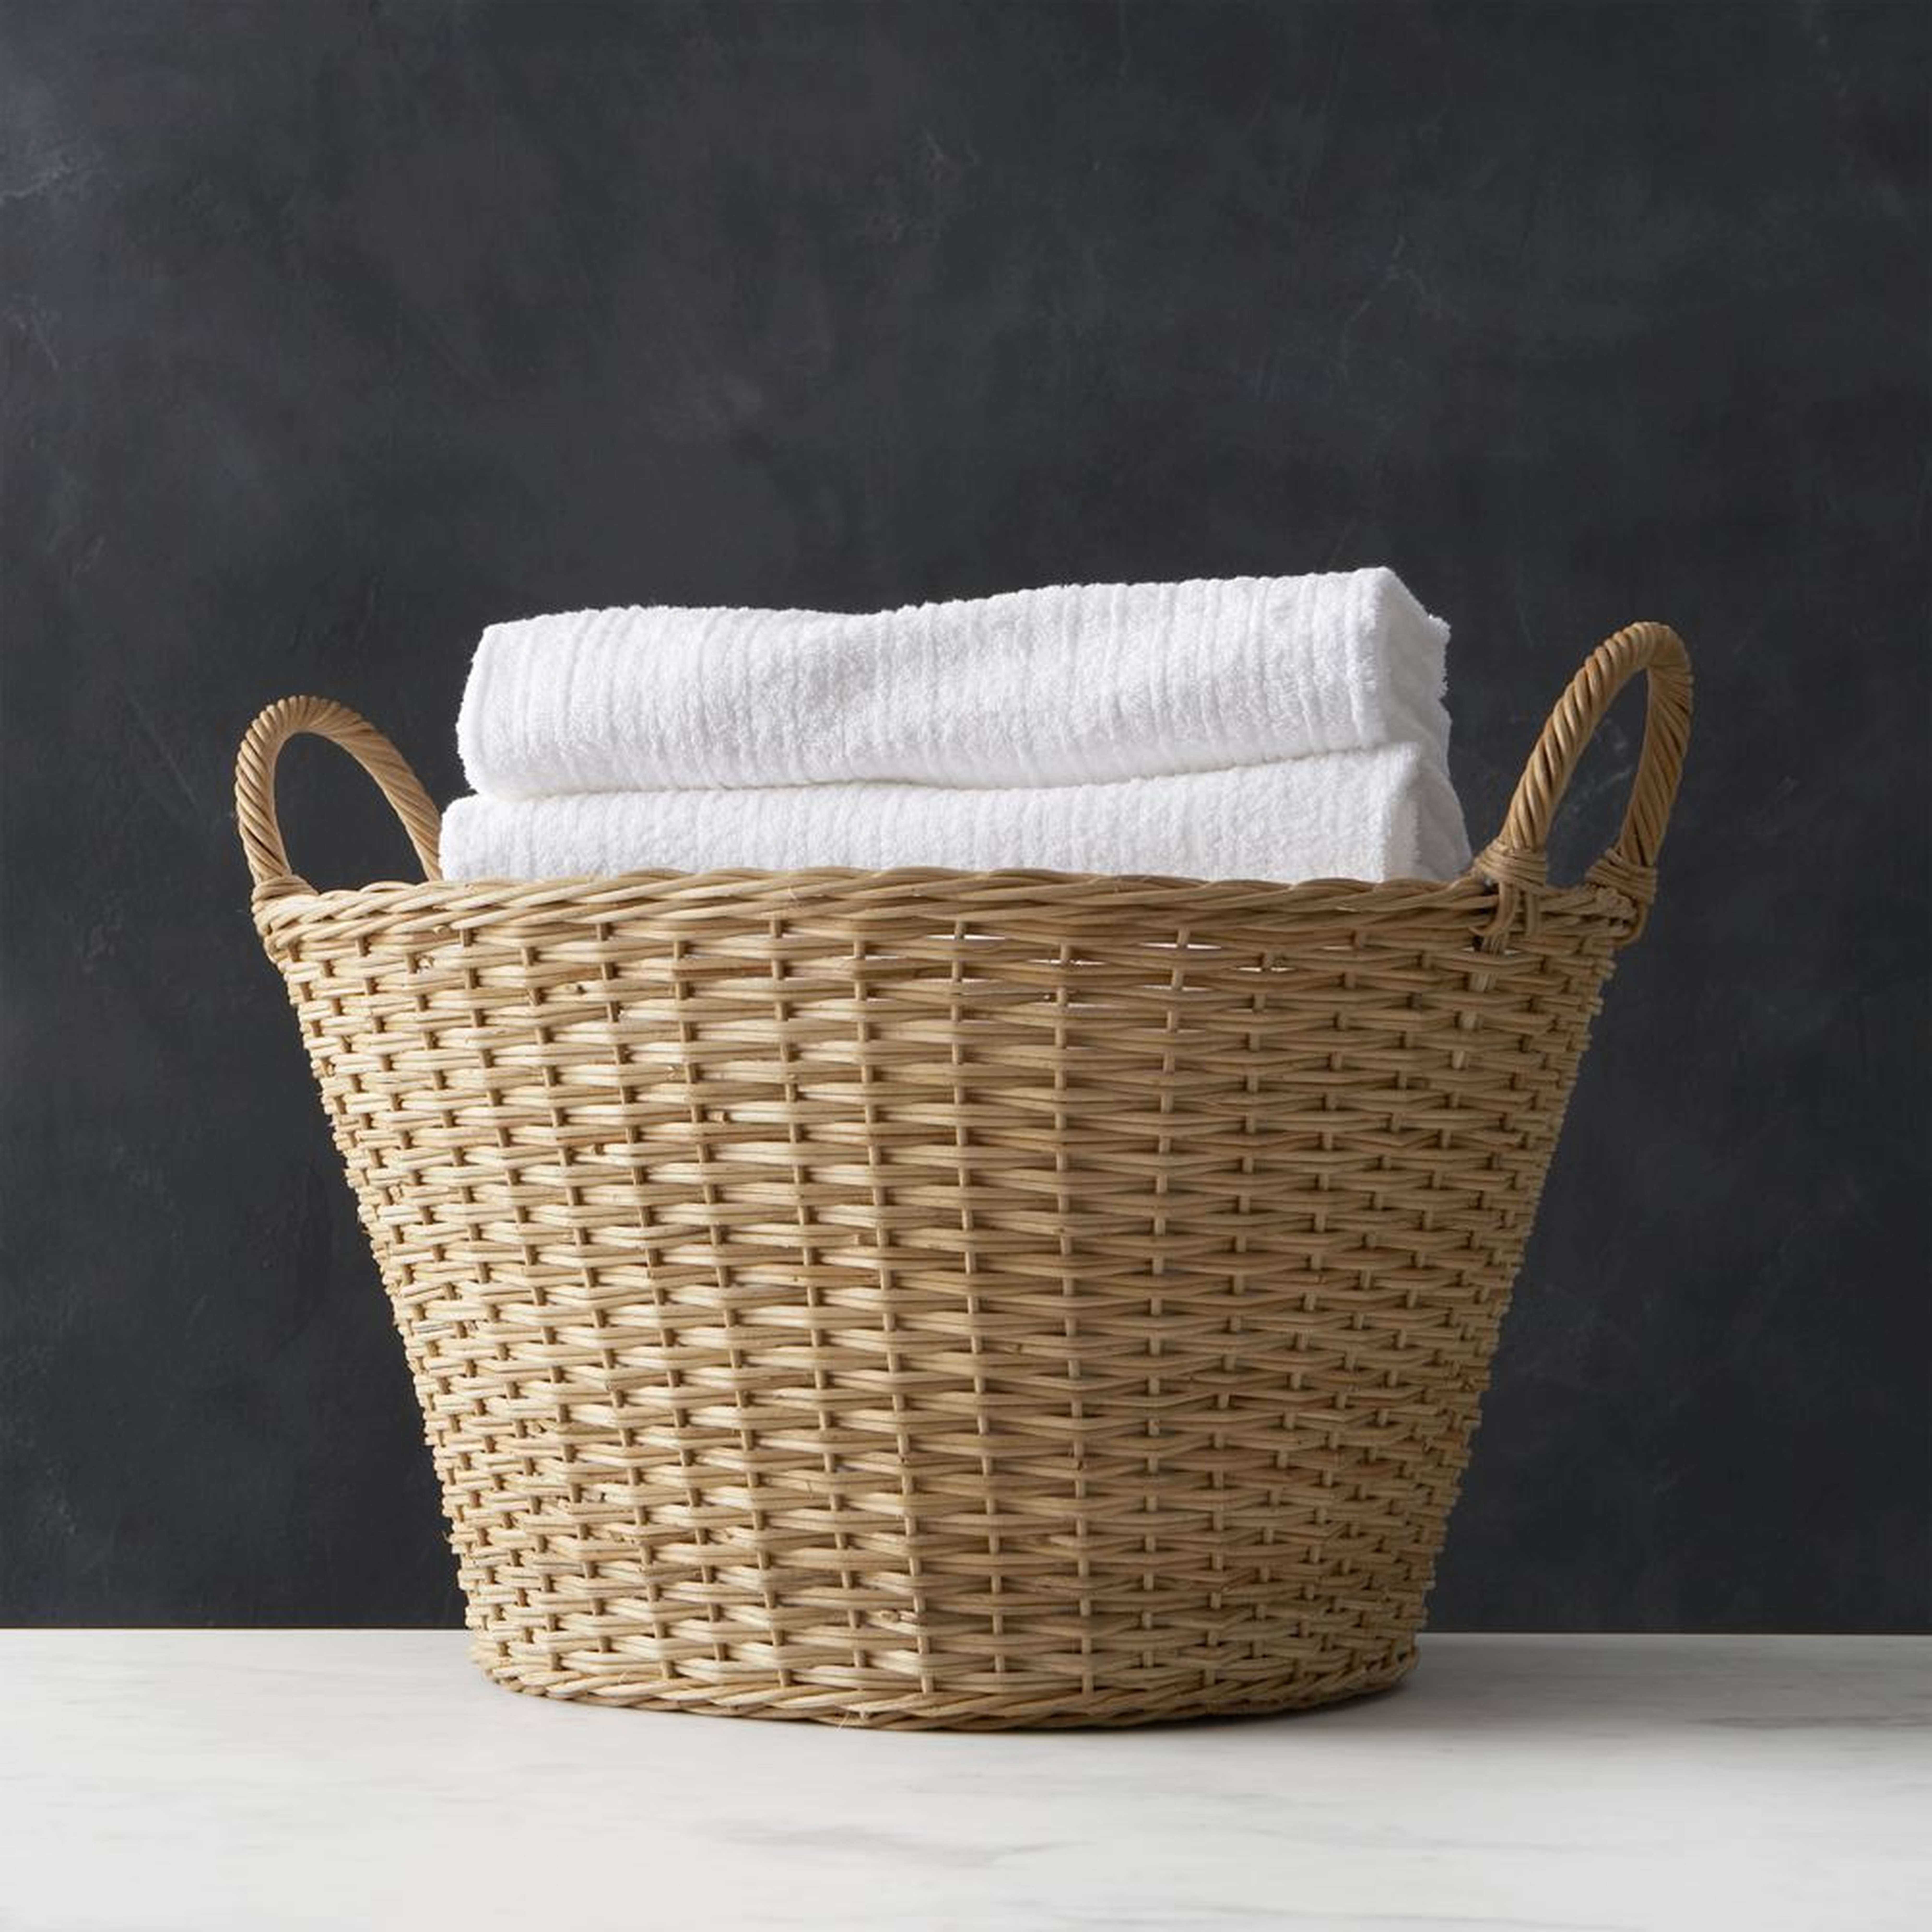 Wicker Laundry Basket - Crate and Barrel